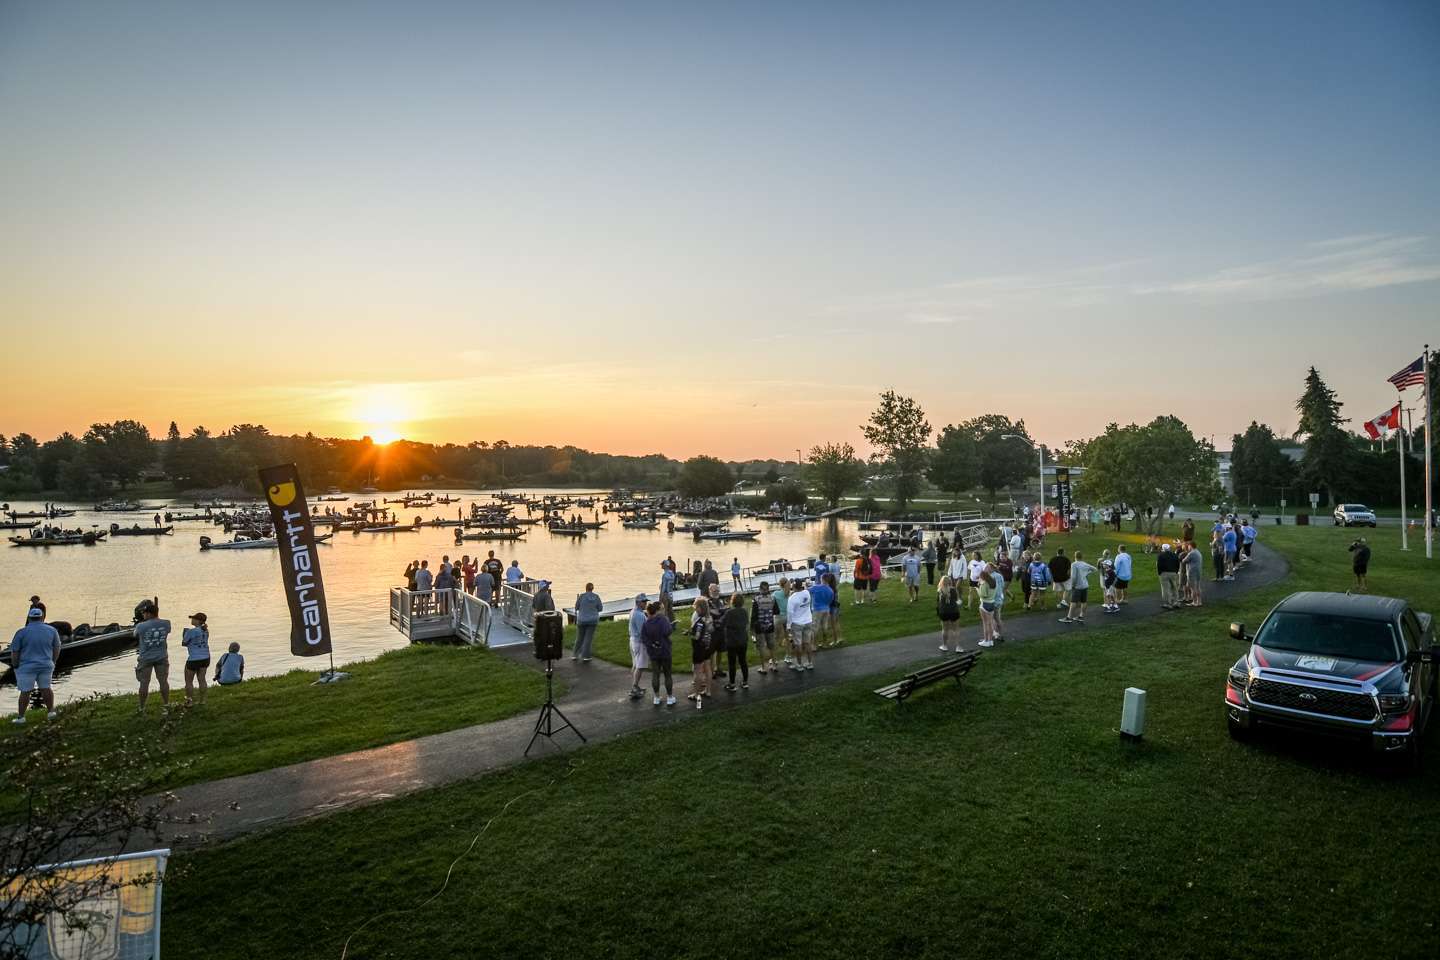 The 2021 Carhartt Bassmaster College Series National Championship presented by Bass Pro Shops was held on the St. Lawrence River and was hosted by Clarkson University. More than 120 teams gathered at the famous fishery to compete for the National Championship and a shot at fishing in the Classic Bracket. 